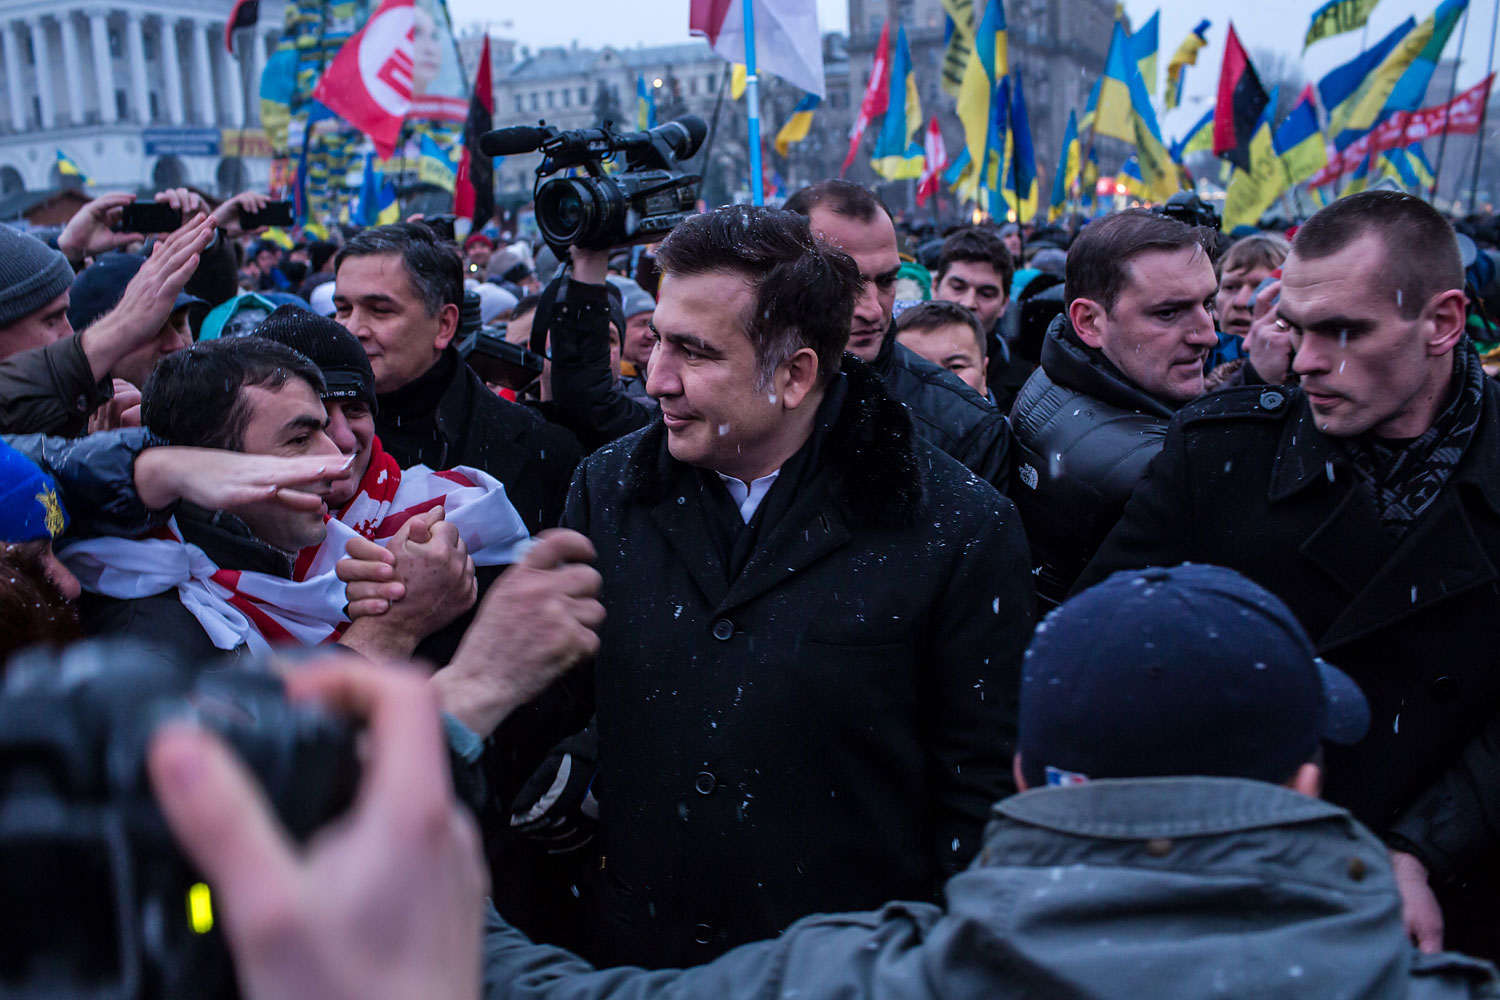 Mikheil Saakashvili, the former president of Georgia, in Independence Square in support of anti-government protesters on December 7, 2013 in Kiev, Ukraine.